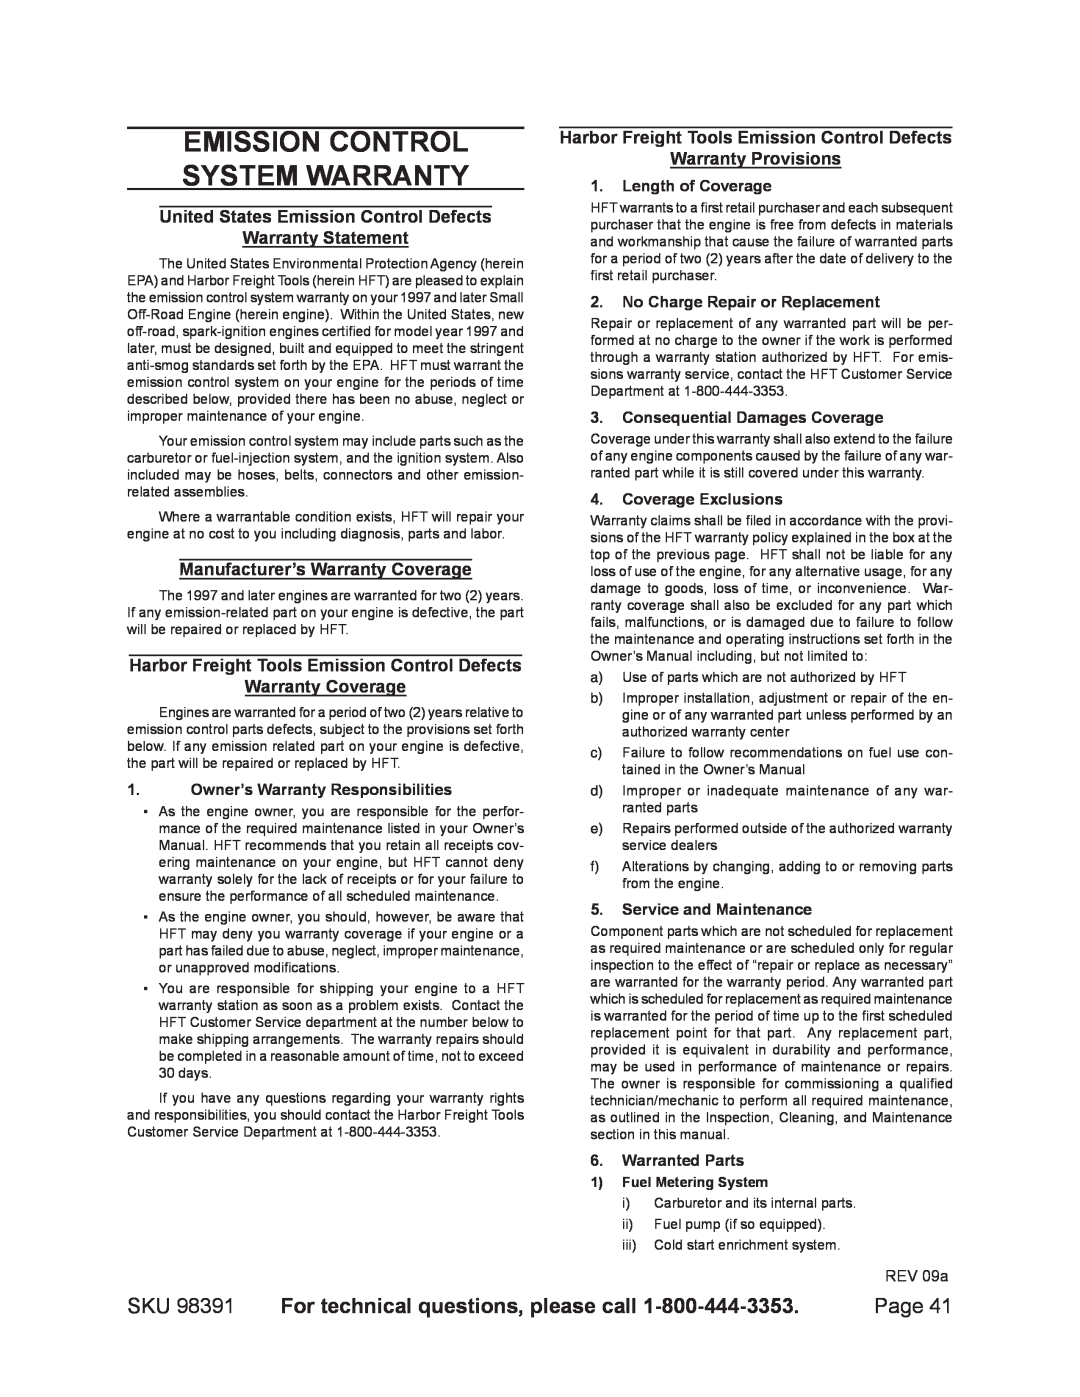 Chicago Electric 98391 Emission Control System Warranty, For technical questions, please call, 1. 1. Length of Coverage 